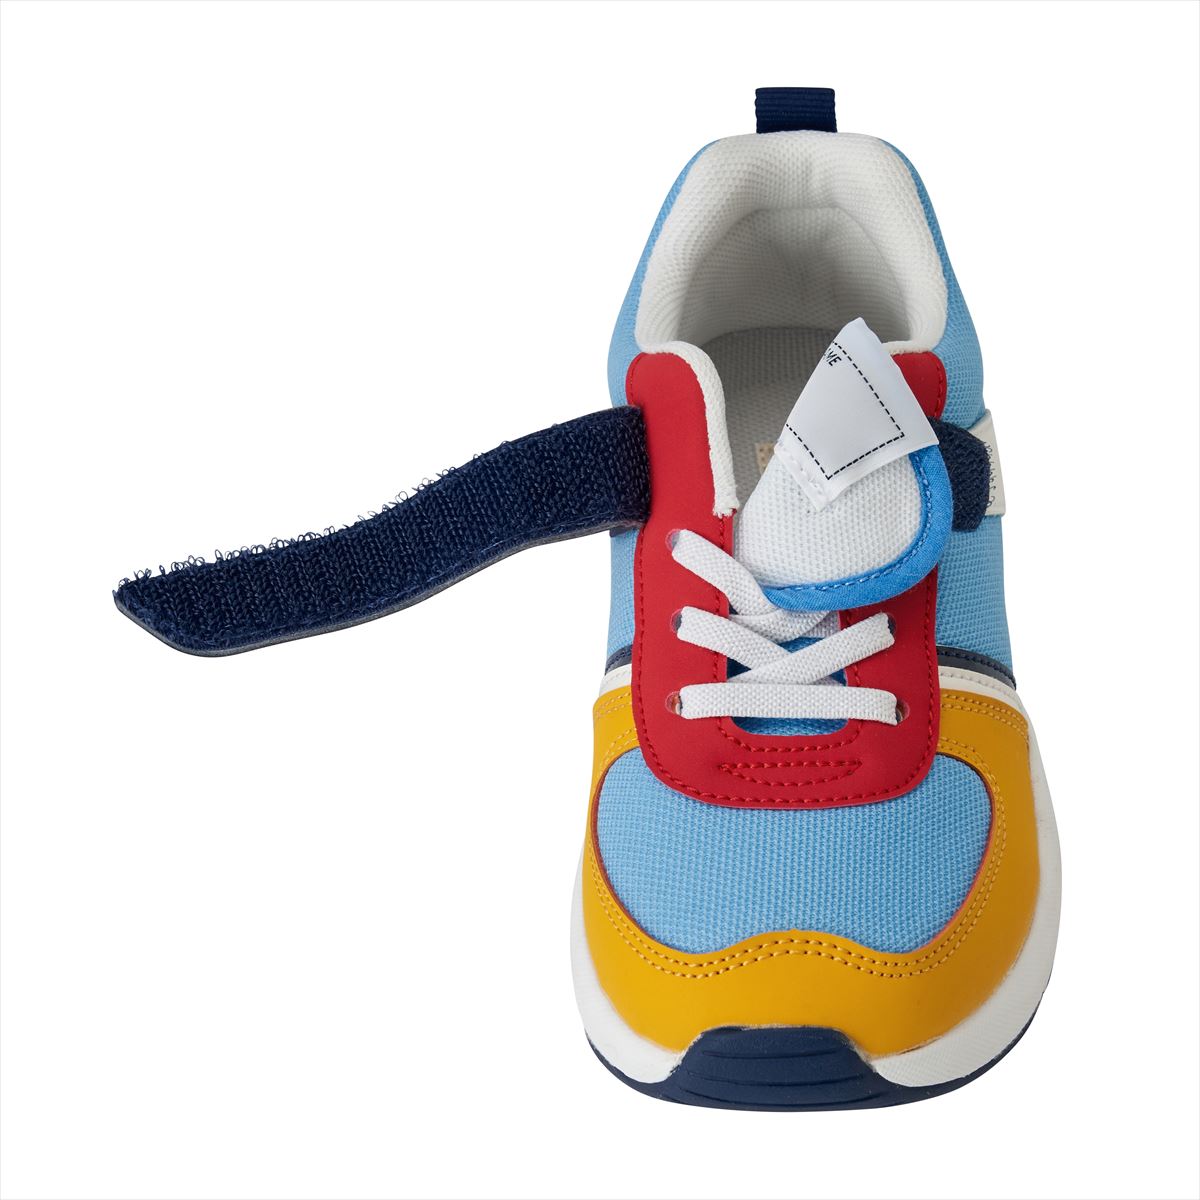 HB-Sneakers for Kids - Sporty Strides